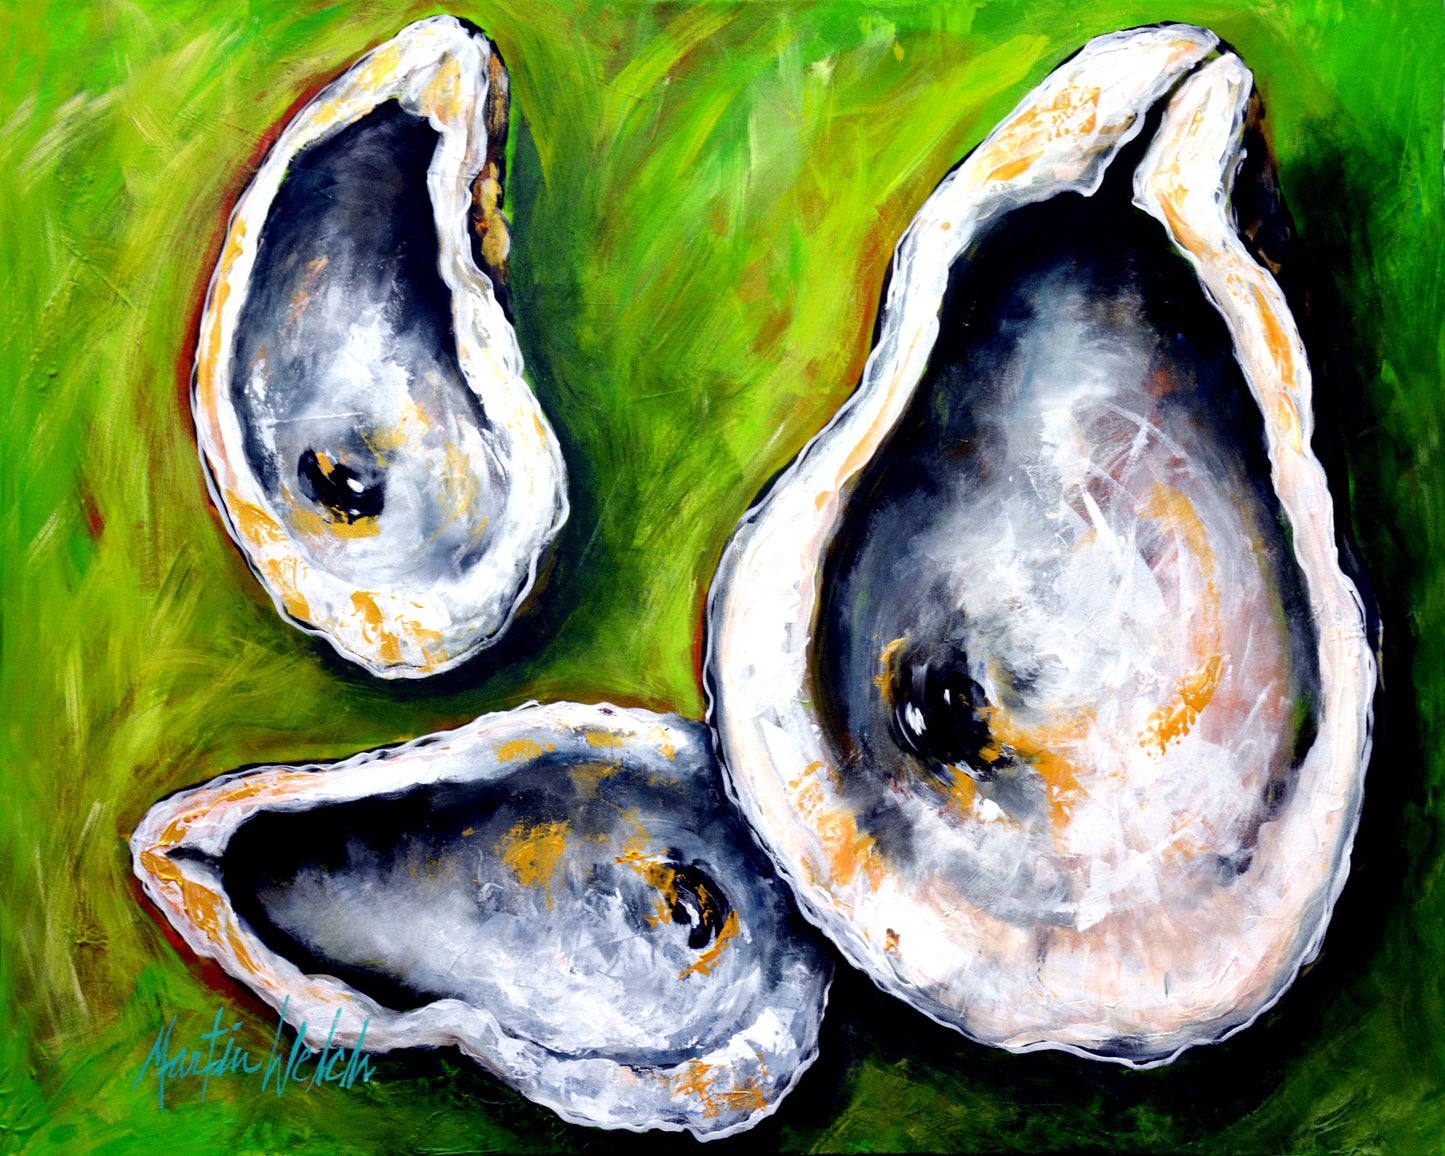 All Shucked Up 11"x14" Print of Oysters